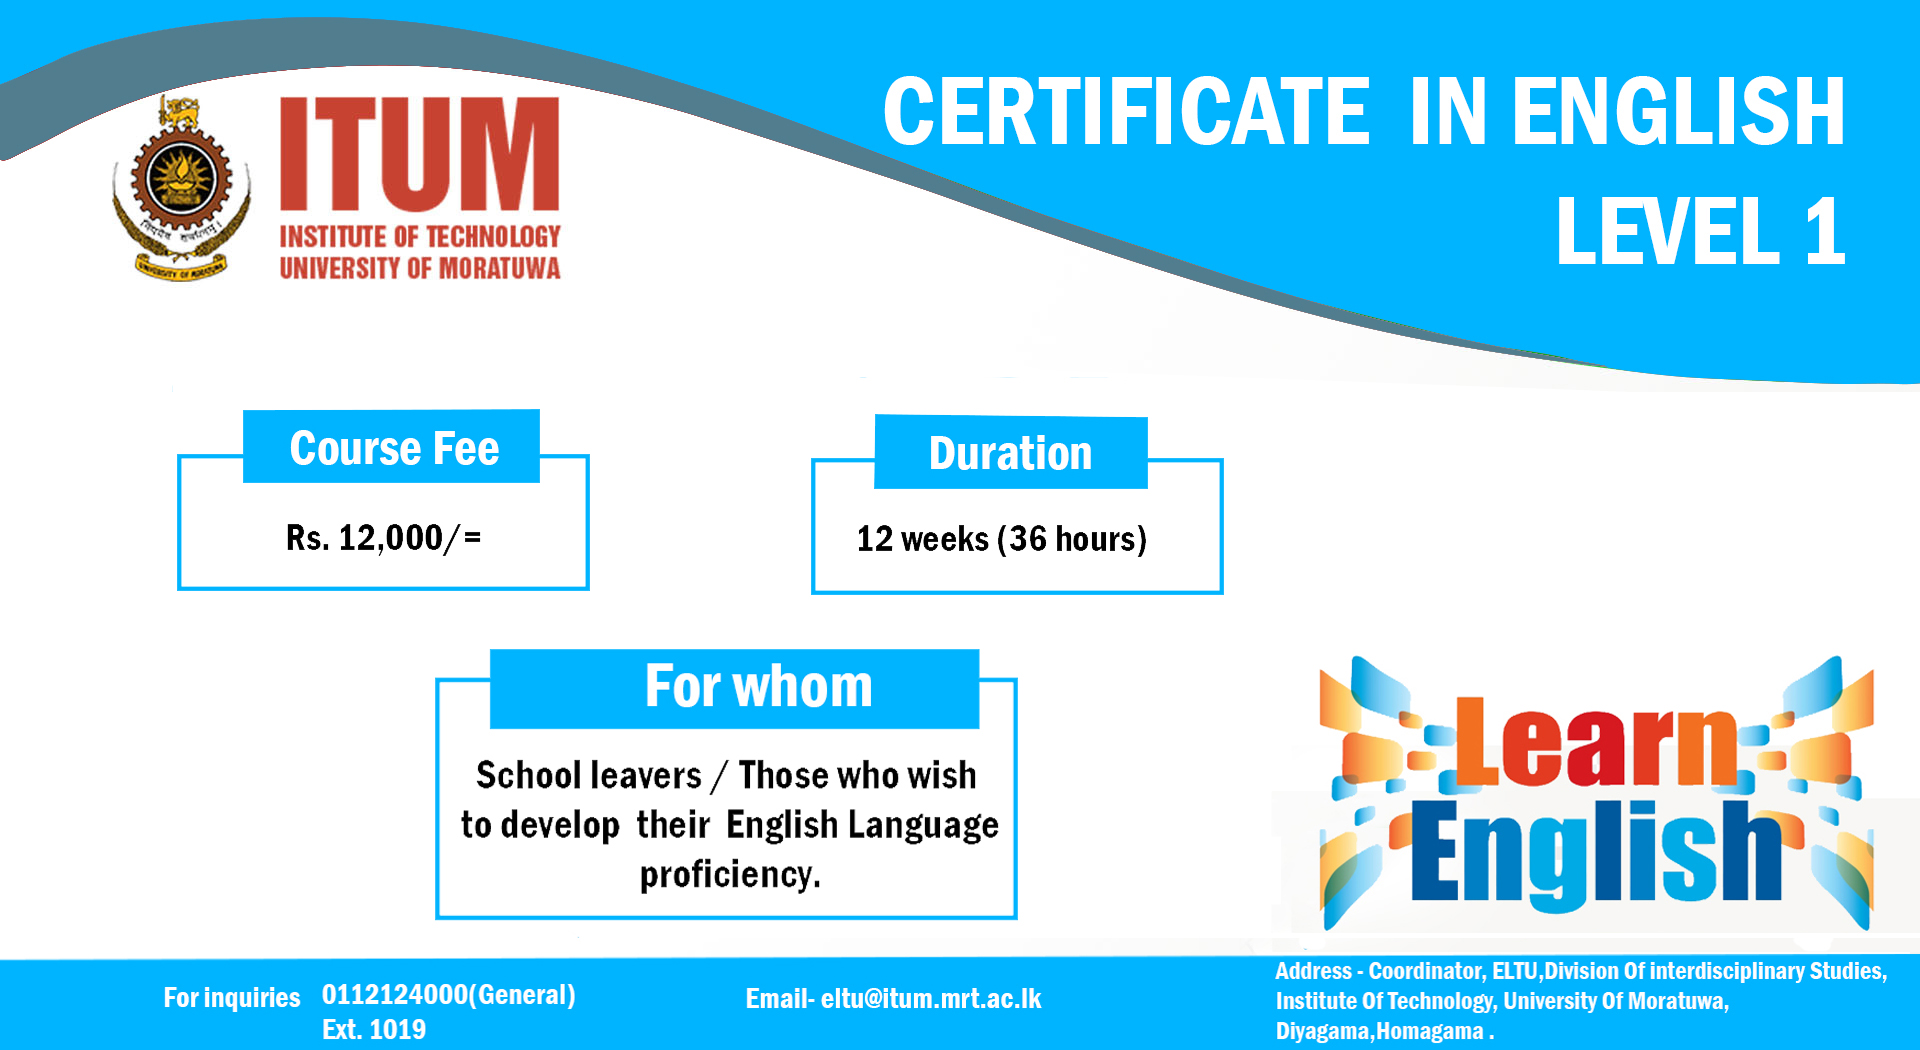 3. Certificate in English - Level 1